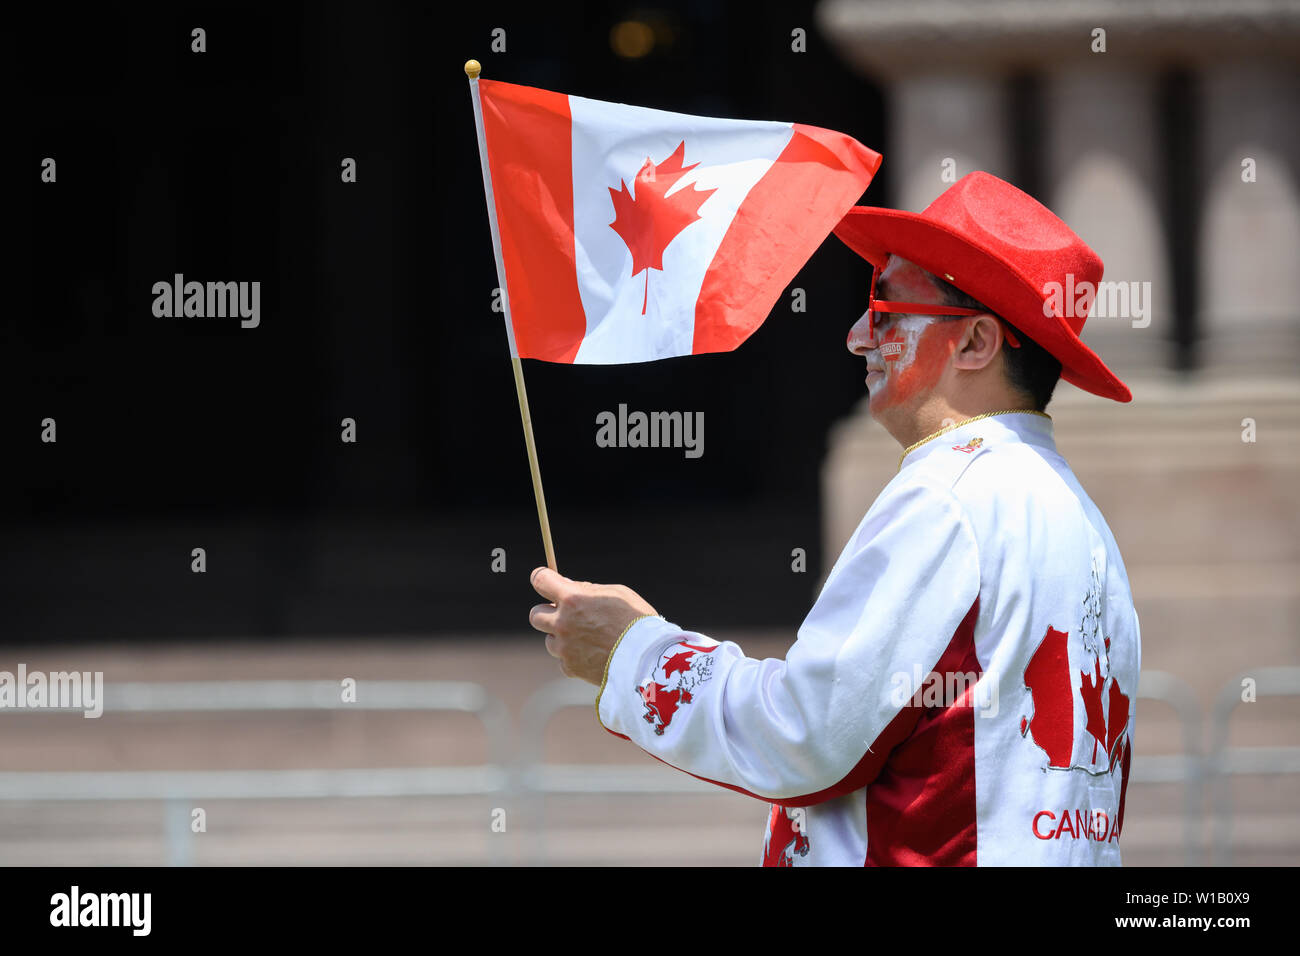 A proud Canadian waves his flag at a Canada Day event at Queen's Park in Toronto, Ontario. Stock Photo